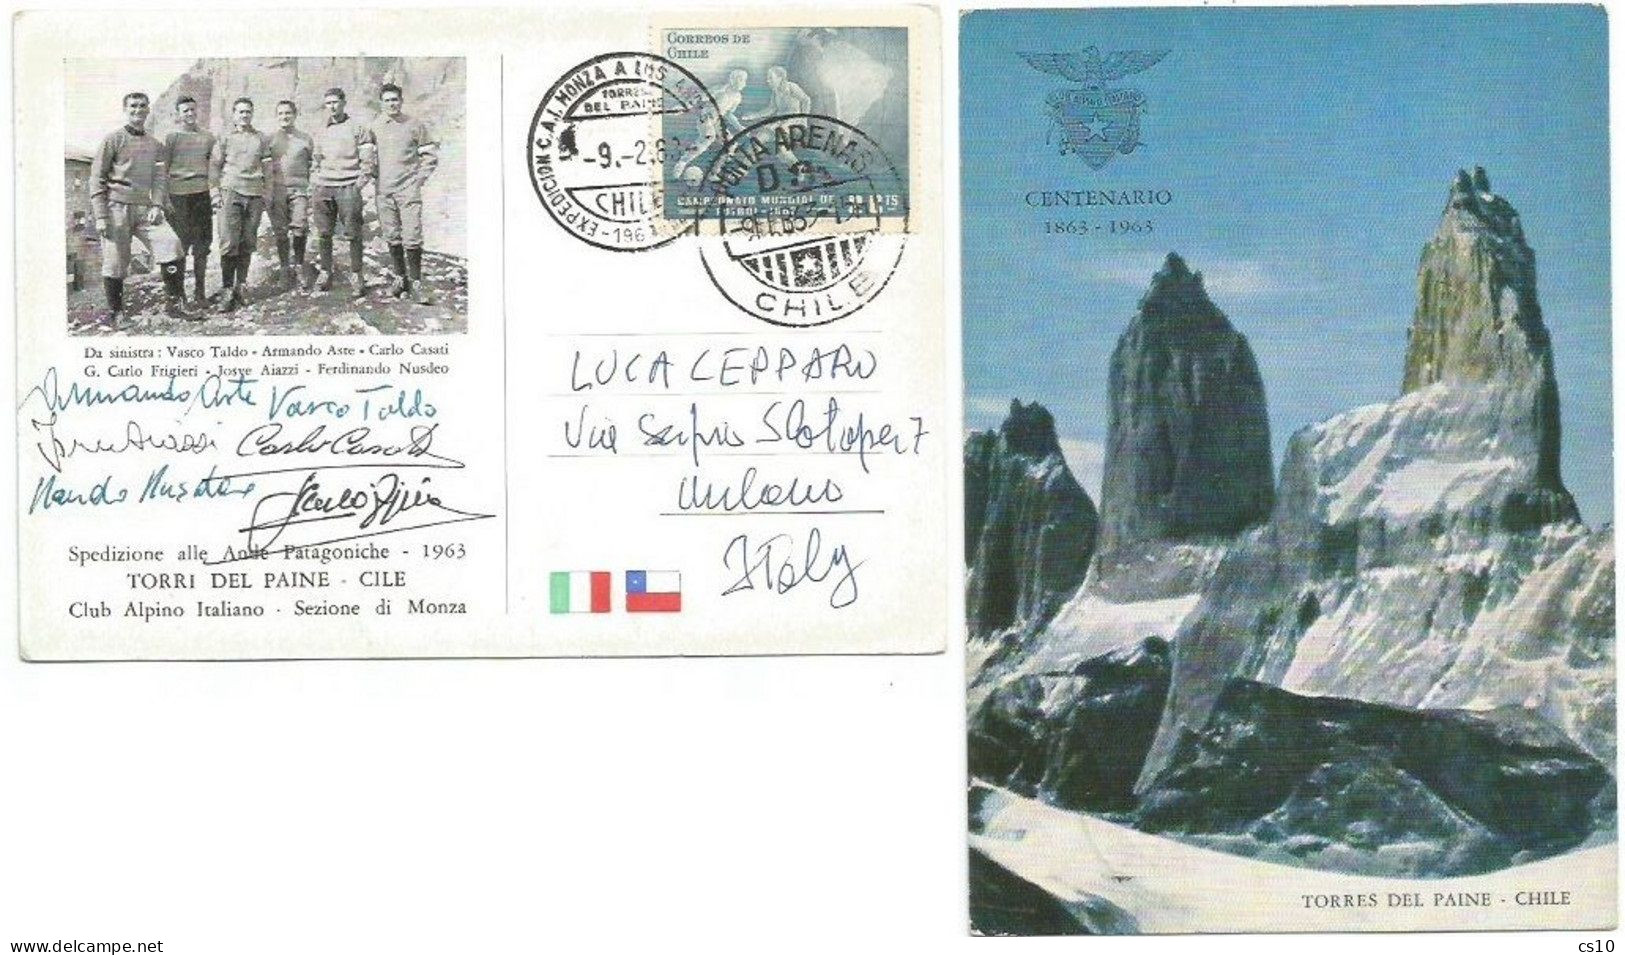 Mountaineering Ande Patagonia Chile Torres Paine Official Pcard Italy Expedition CAI Monza 1963 With 6 Handsigns !!! - Mountaineering, Alpinism